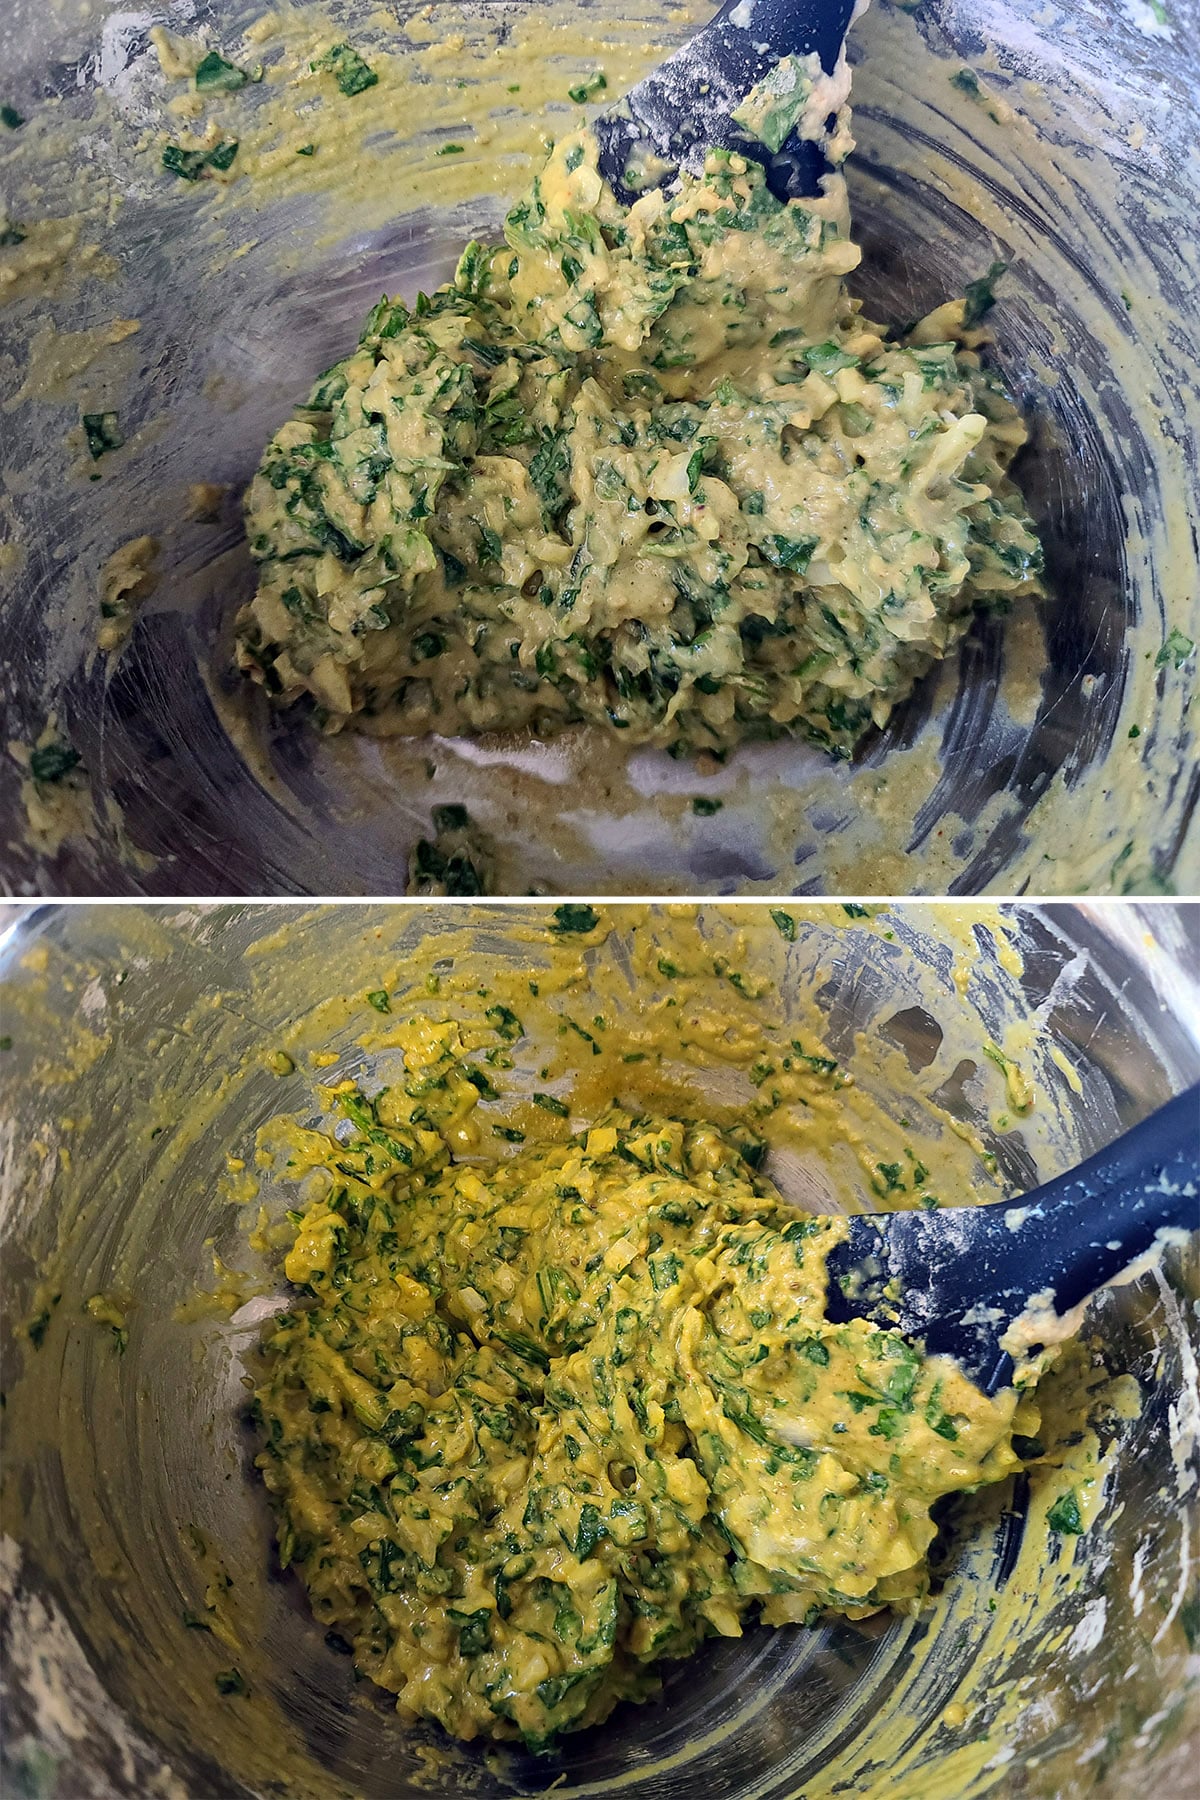 A 2 part image showing the batter after sitting, and with a bit of water added.